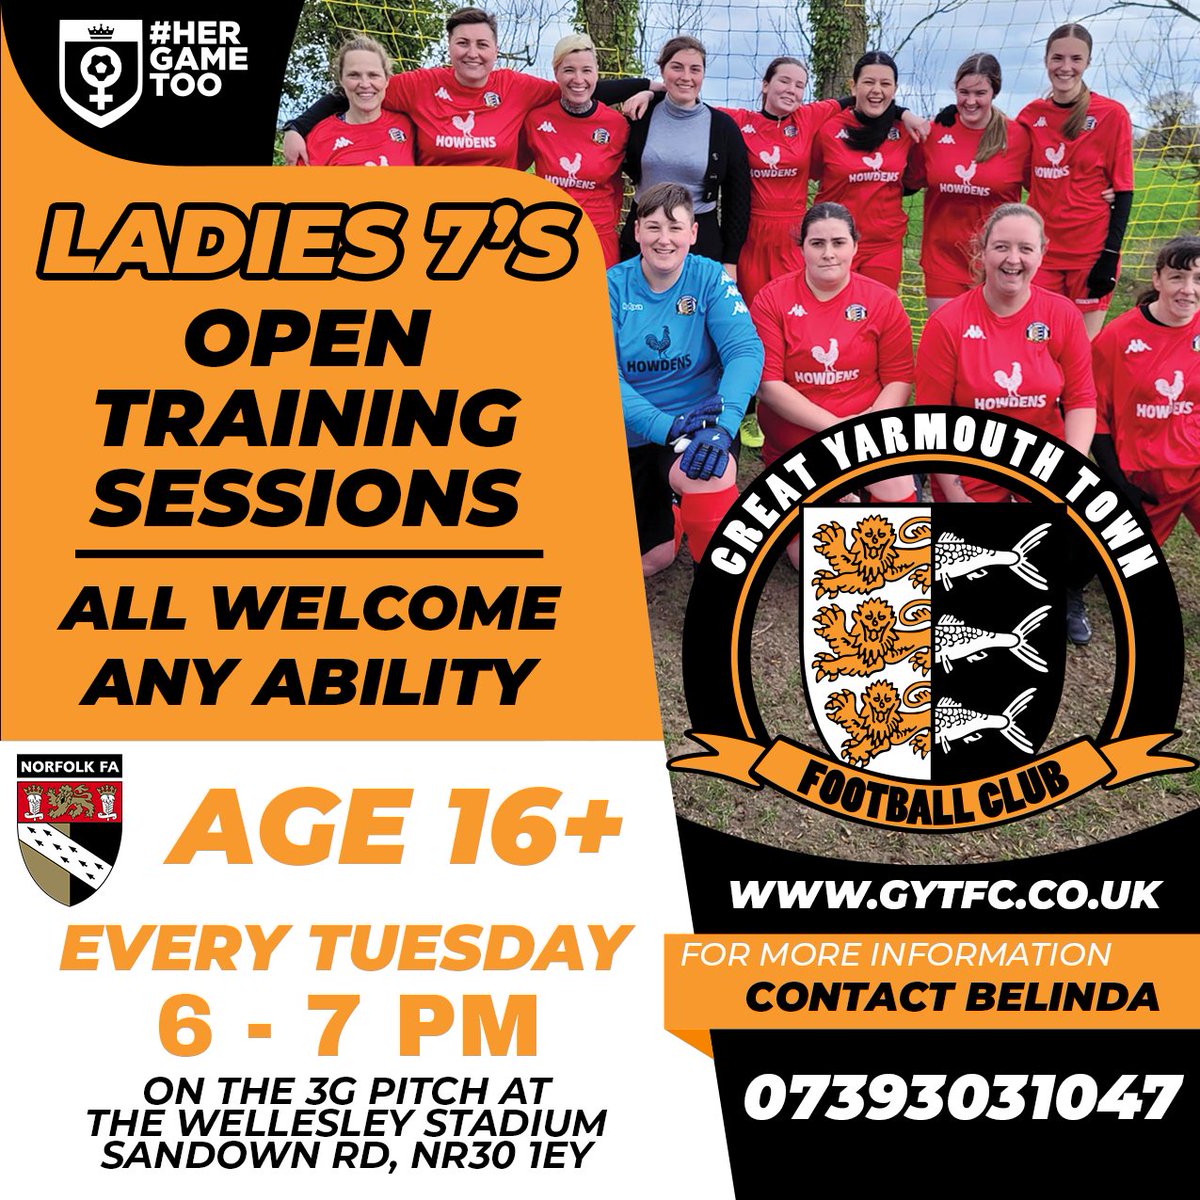 Our Ladies 7's team is holding OPEN TRAINING SESSIONS! No matter what your experience or ability, we welcome all ladies aged 16+ to come and give football a try! Join us every Tuesday from 6-7pm on the 3G pitch at The Wellesley Stadium. For more info give Belinda a call.